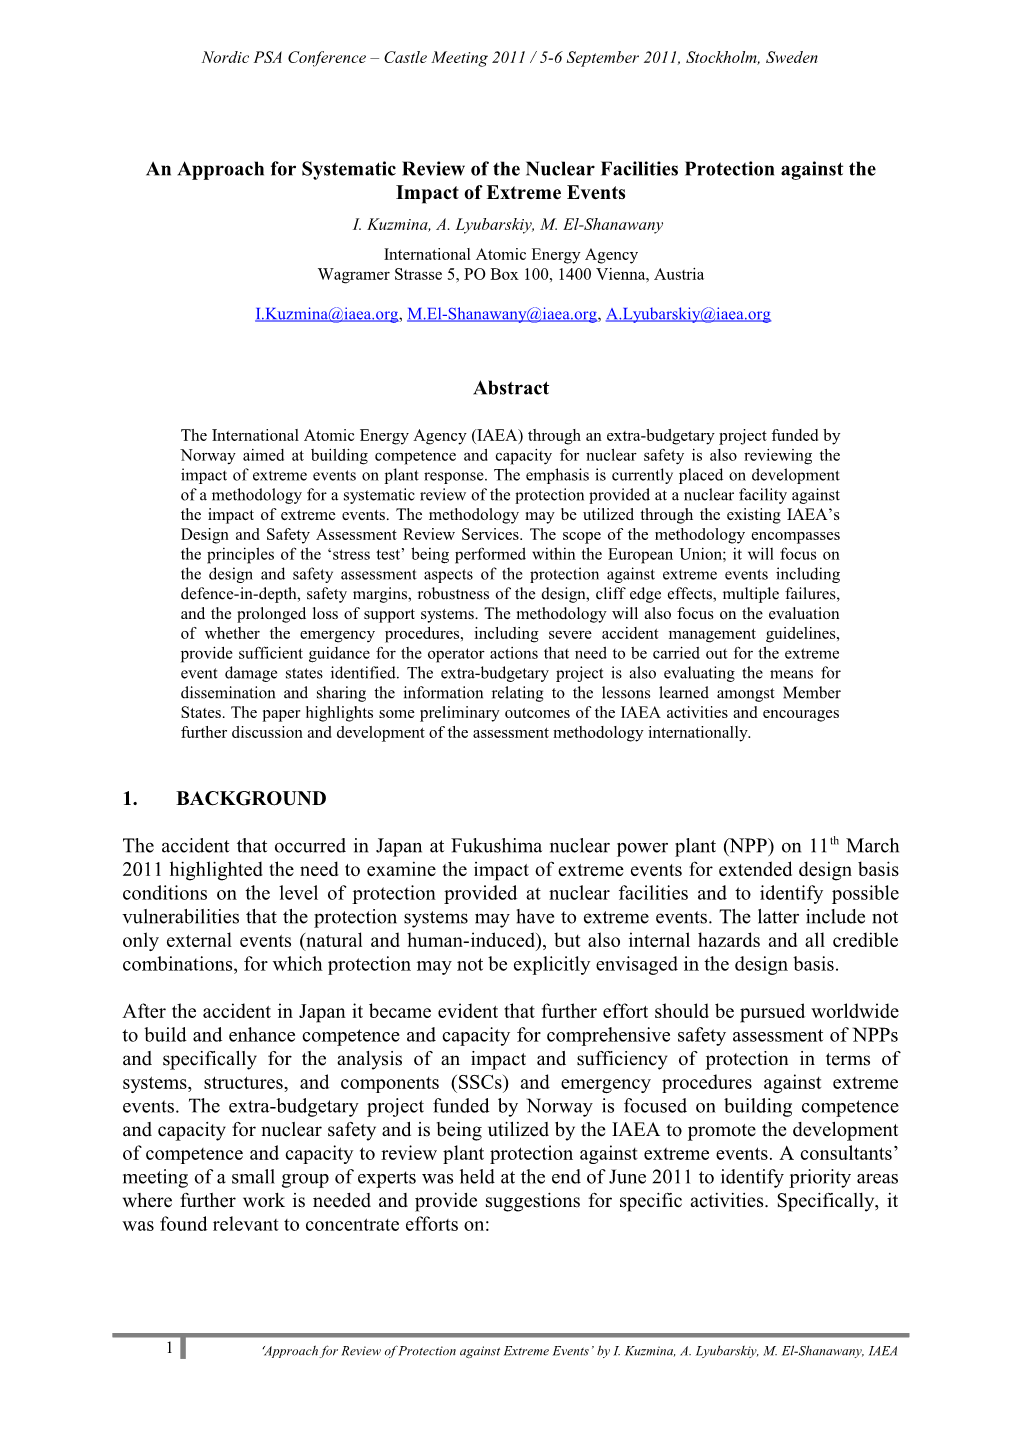 An Approach for Systematic Peer Review of the Nuclear Facilities Protection Against The